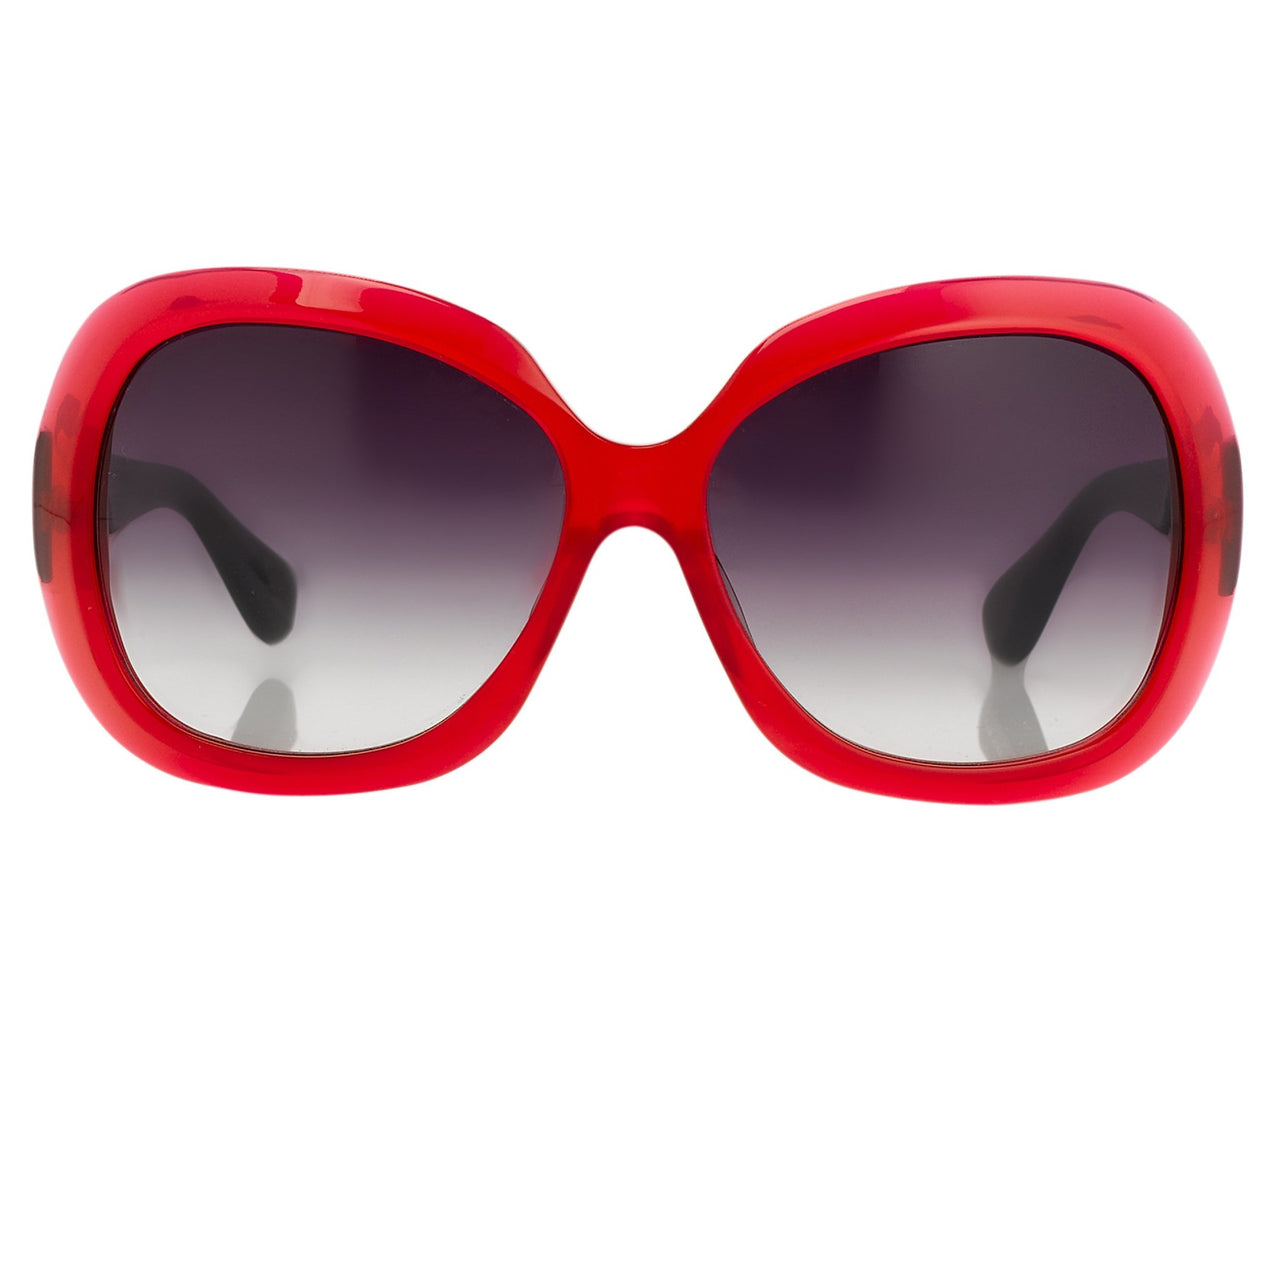 Rue De Mail Sunglasses Oversized Translucent Red with Grey Graduated Lenses RDM2C4SUN - Watches & Crystals